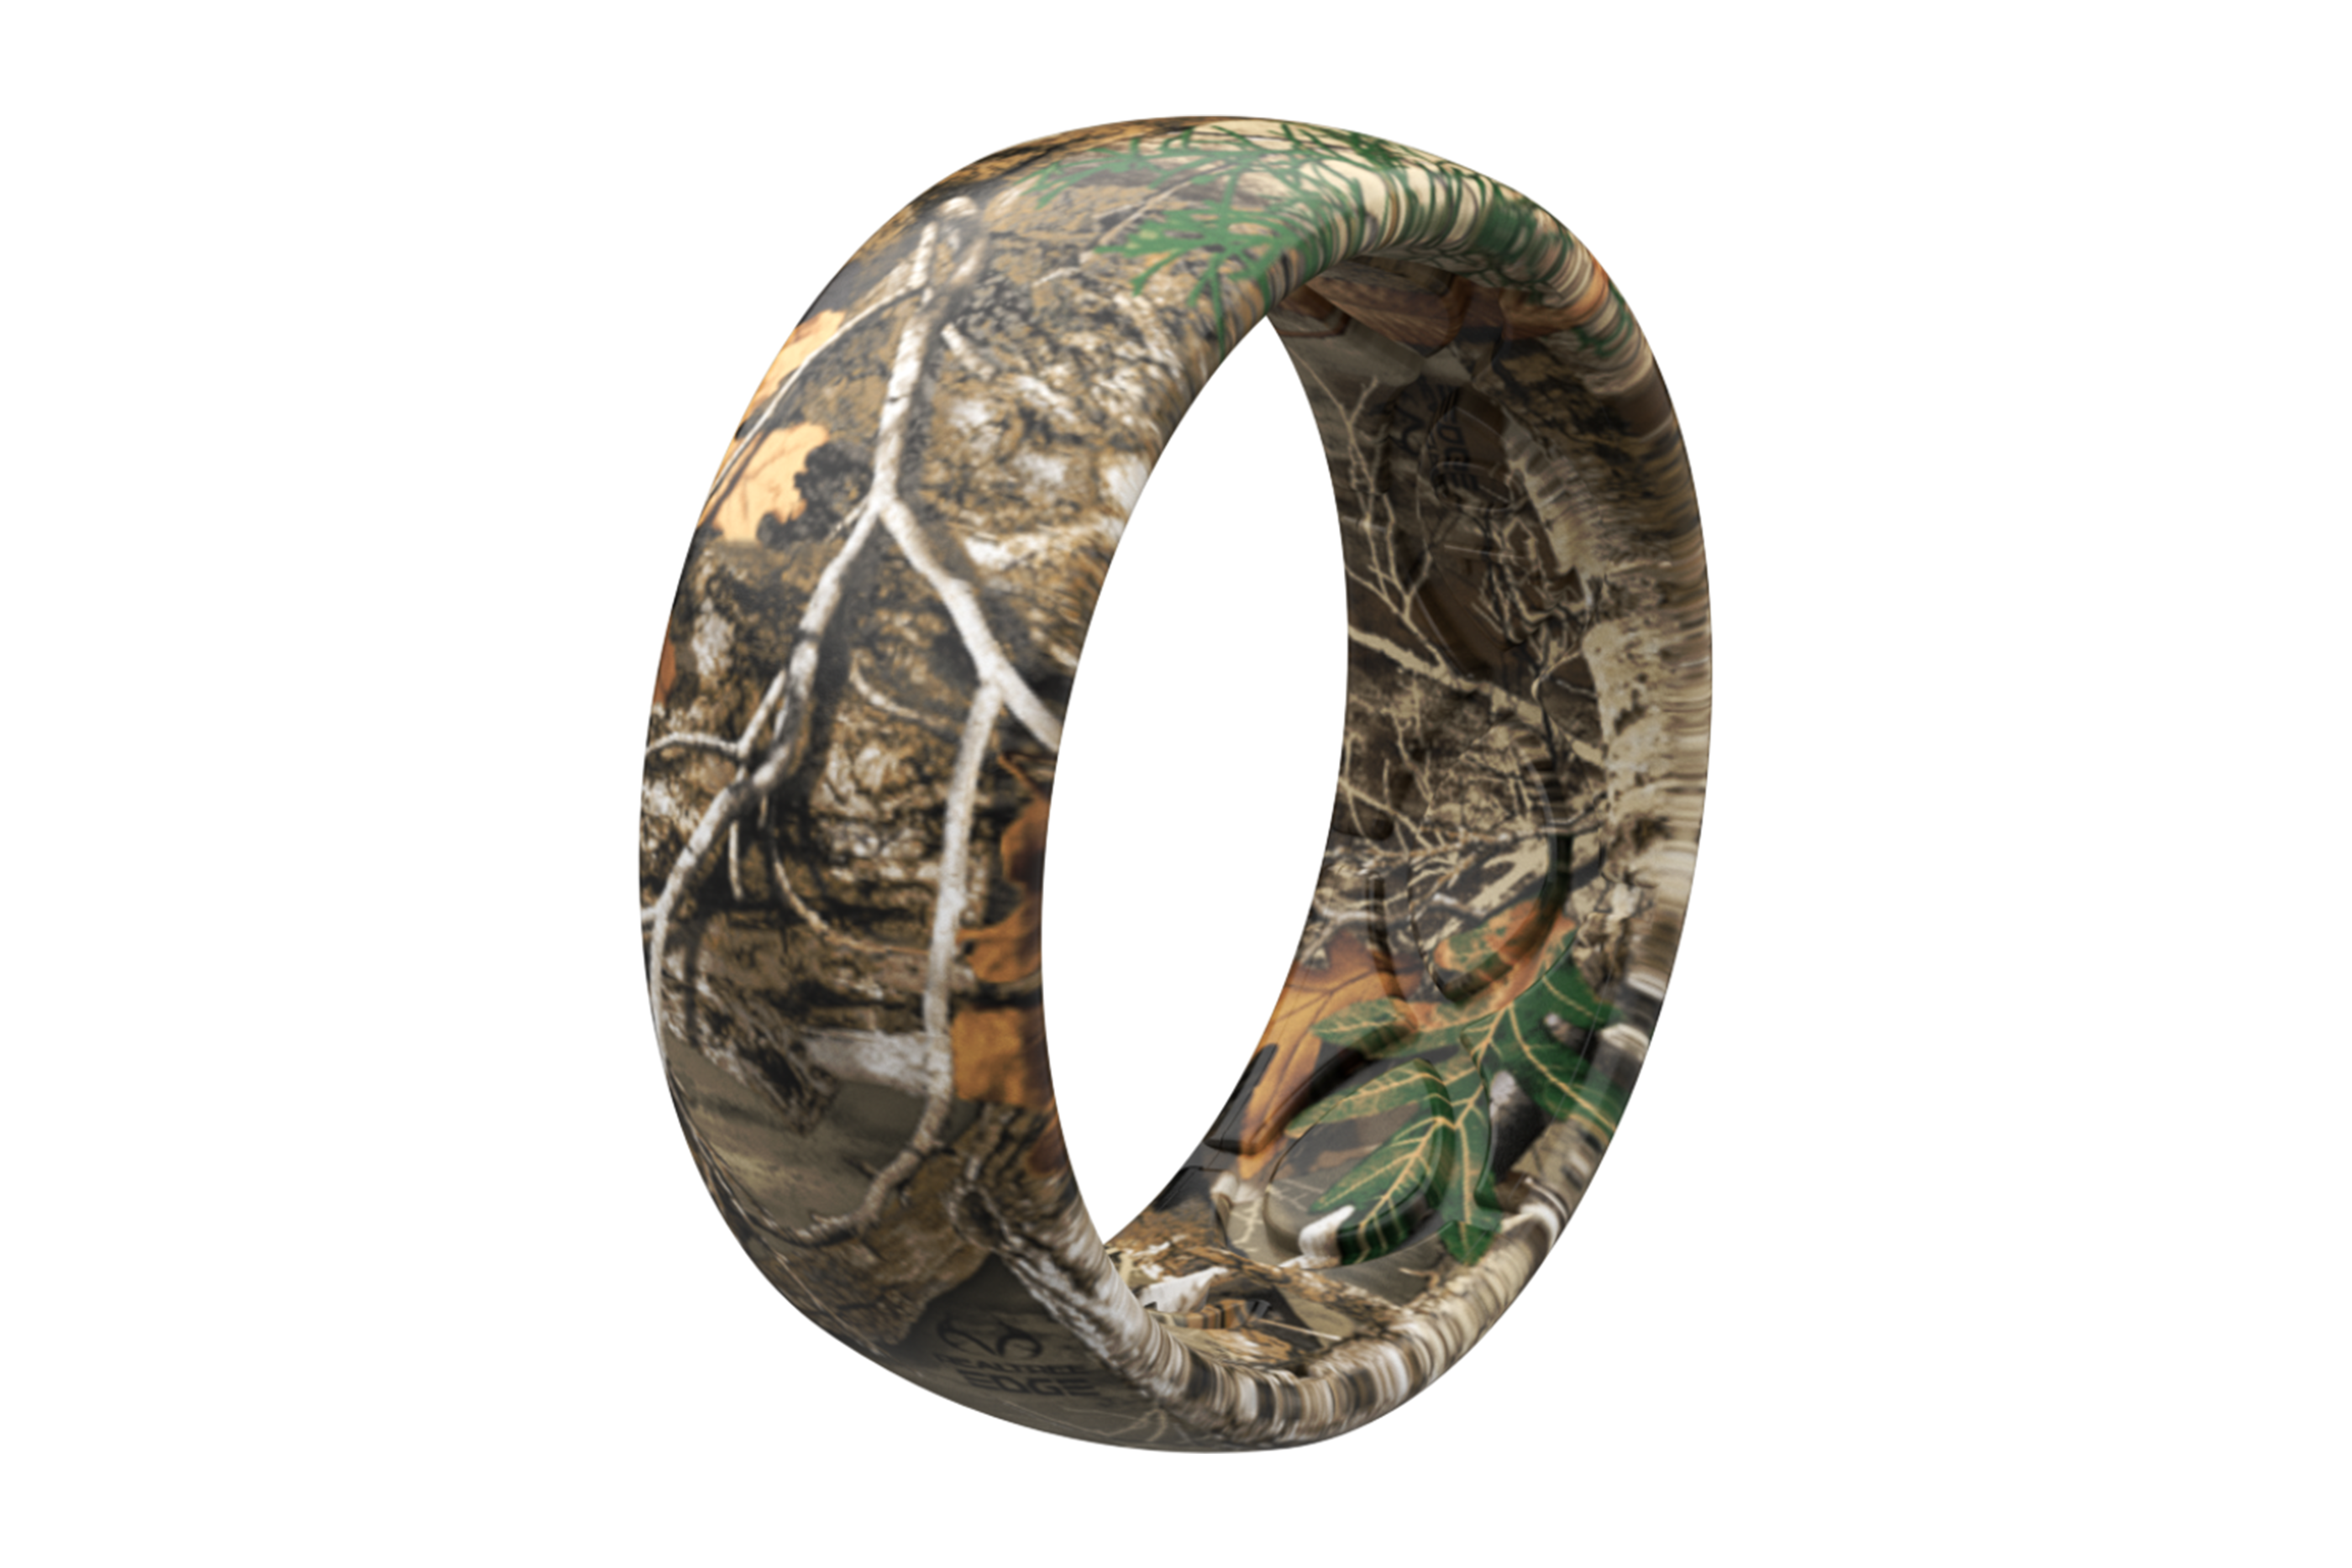 Original Camo Realtree Edge  viewed on its side  viewed on its side